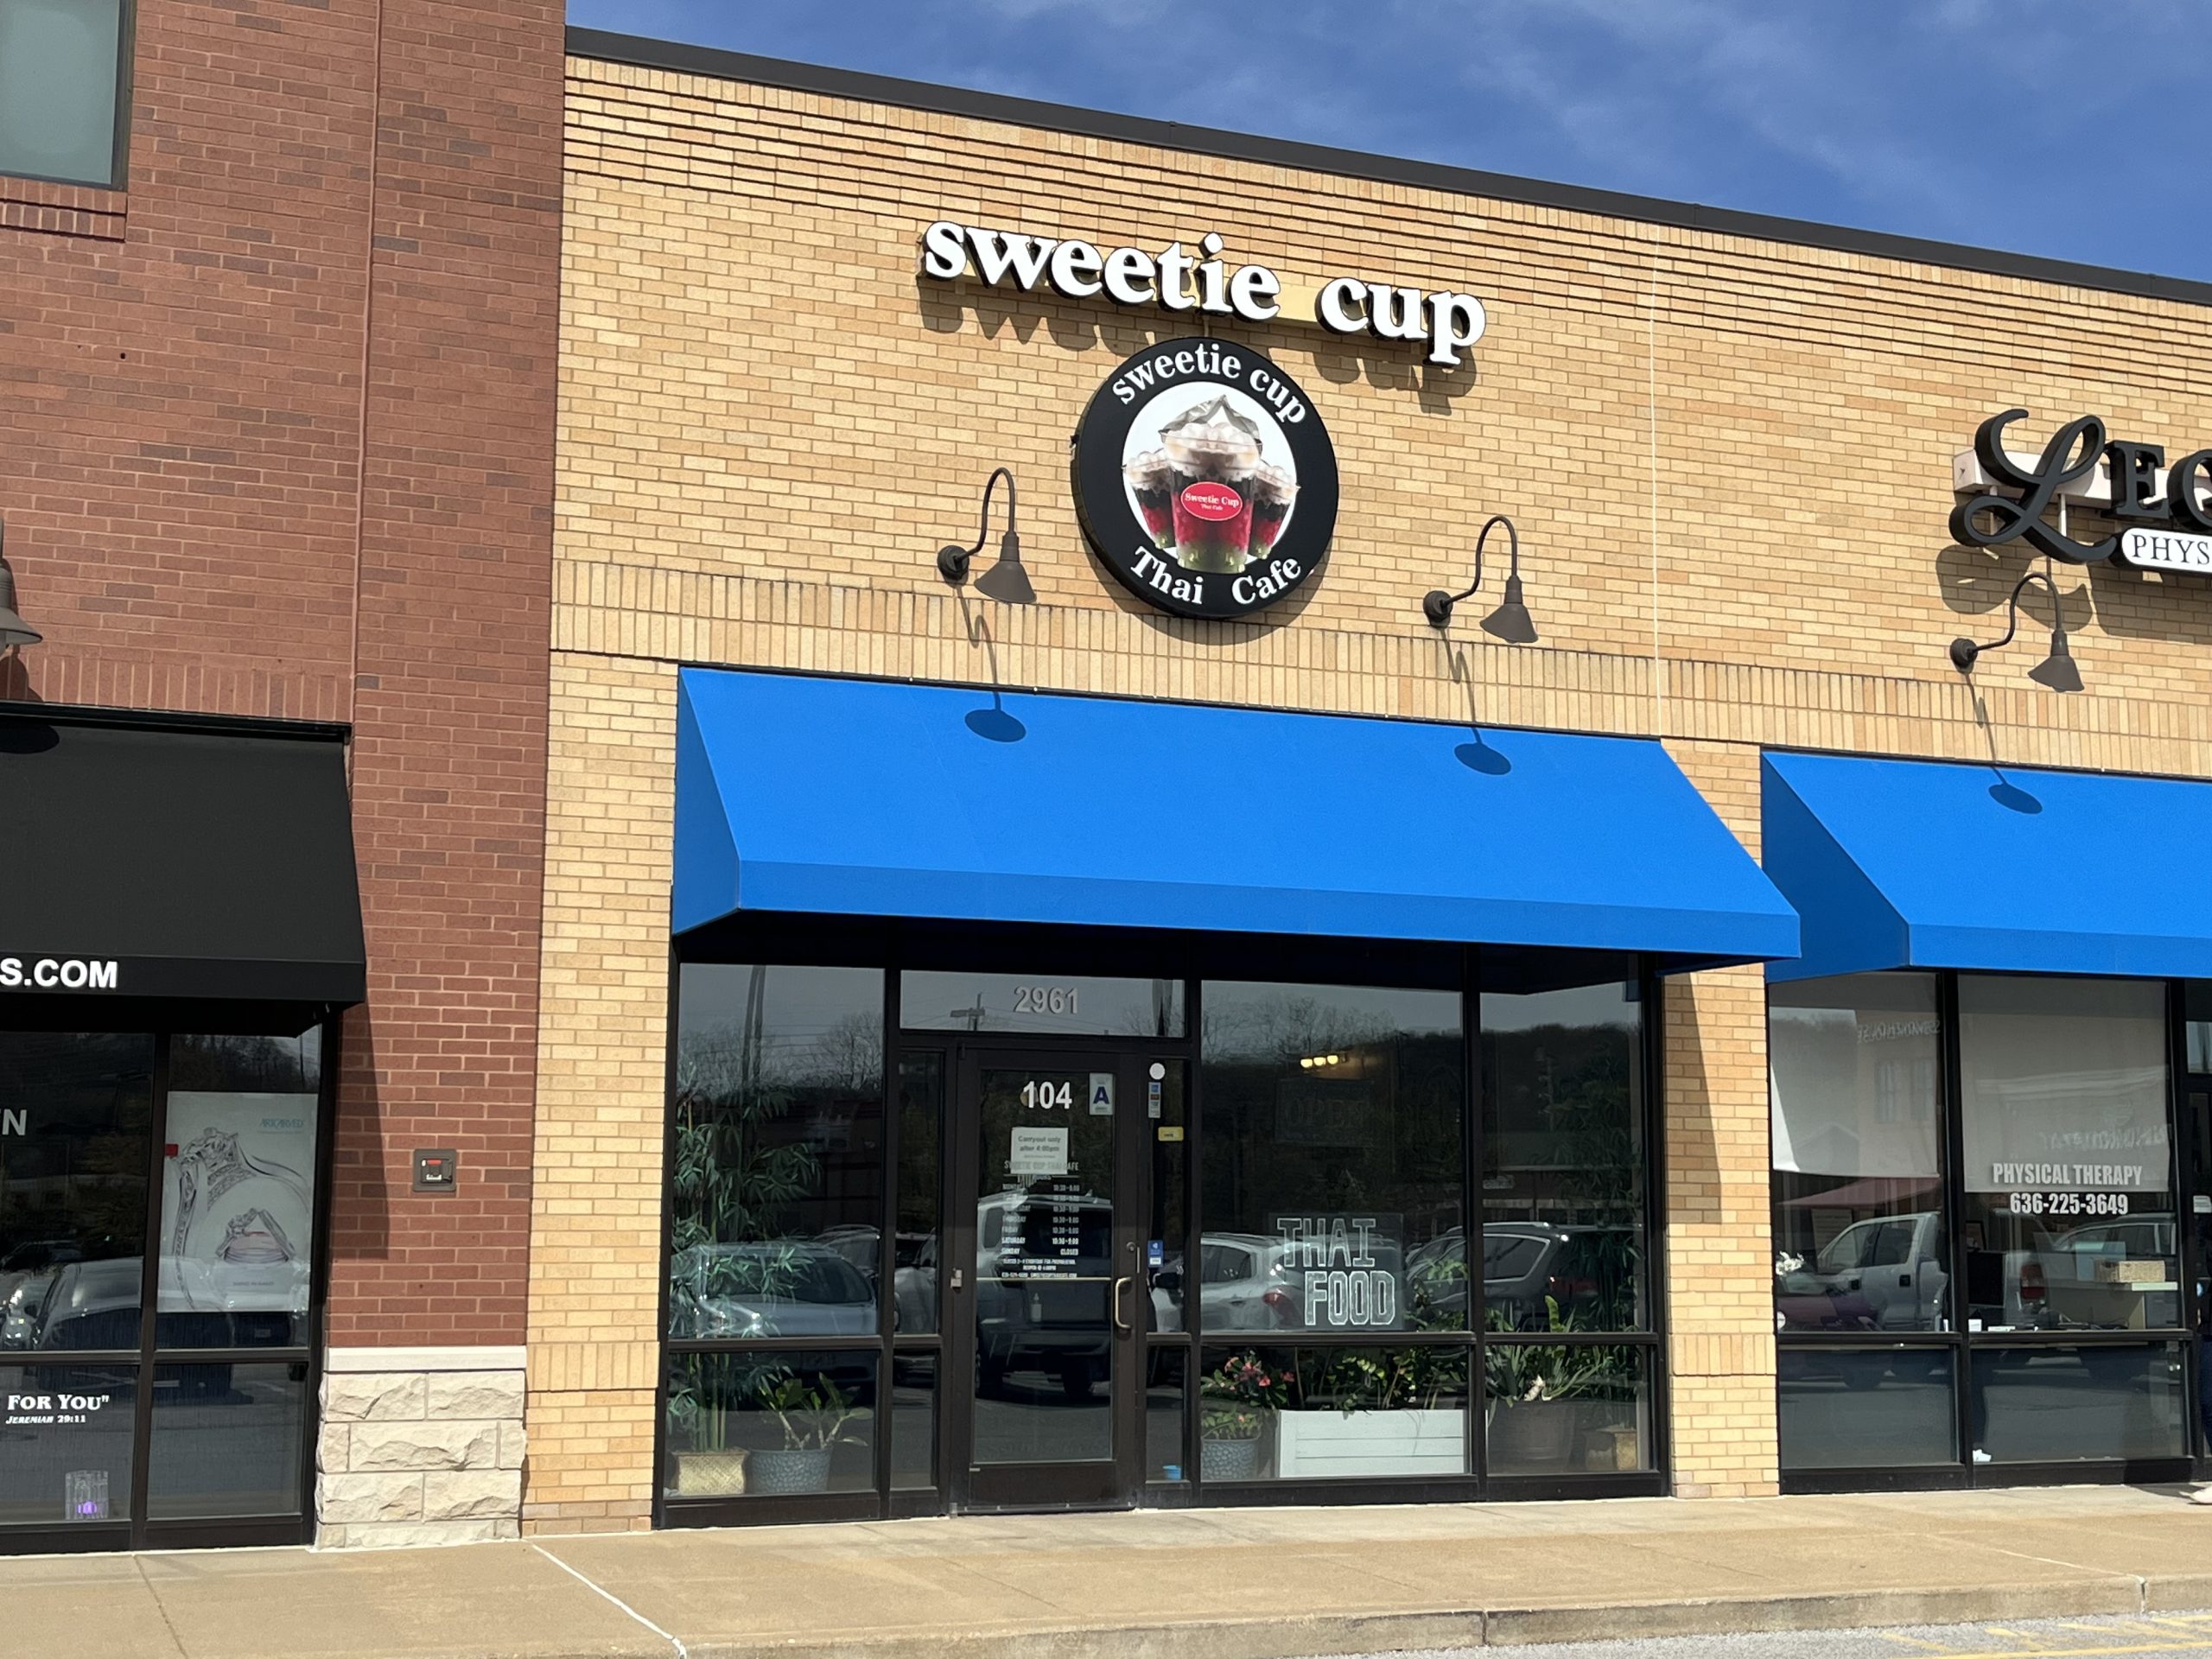 Sweetie Cup Thai Café Offers Delivery